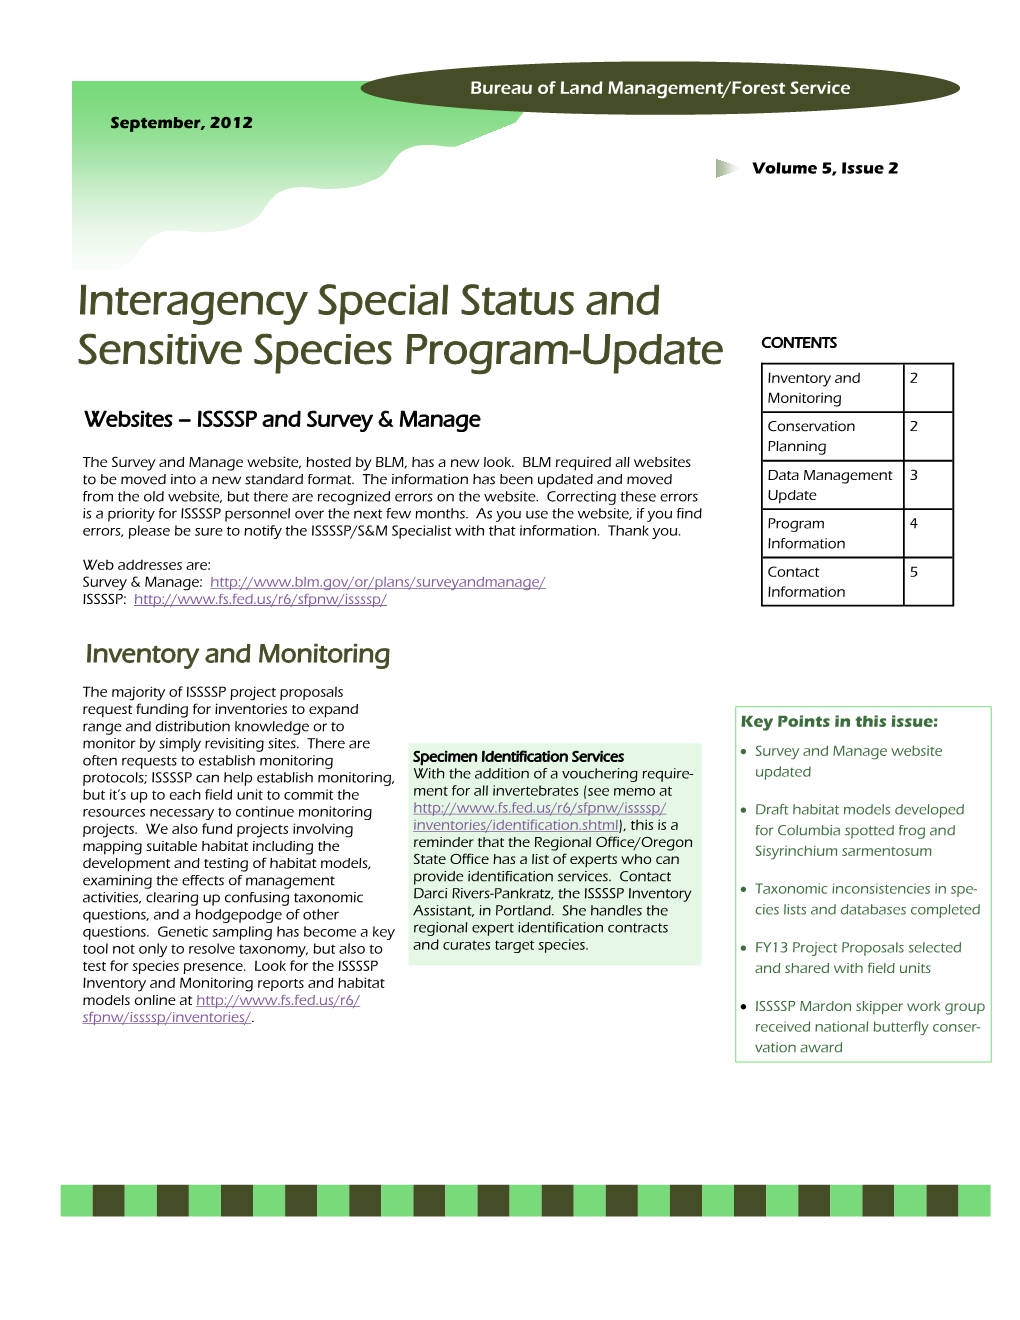 Interagency Special Status and Sensitive